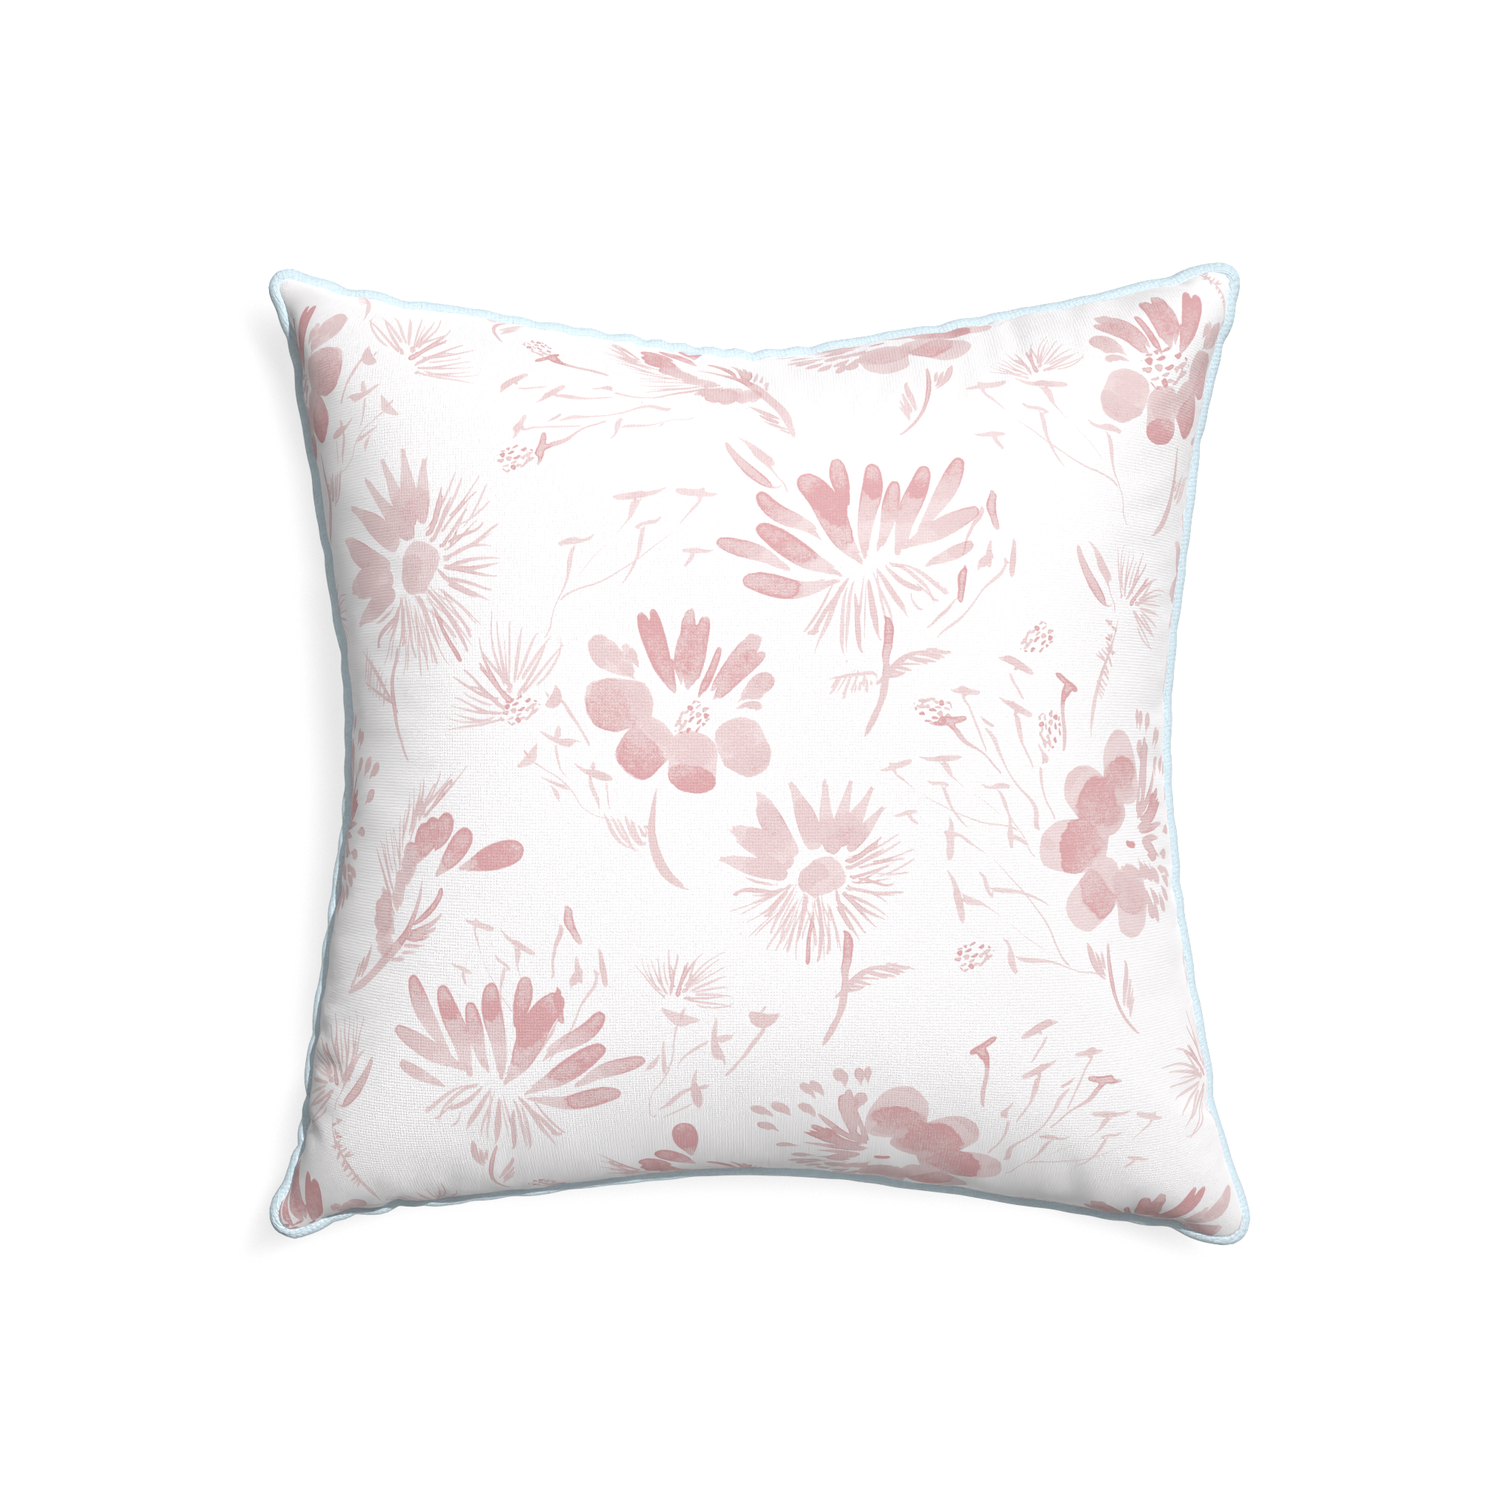 22-square blake custom pink floralpillow with powder piping on white background